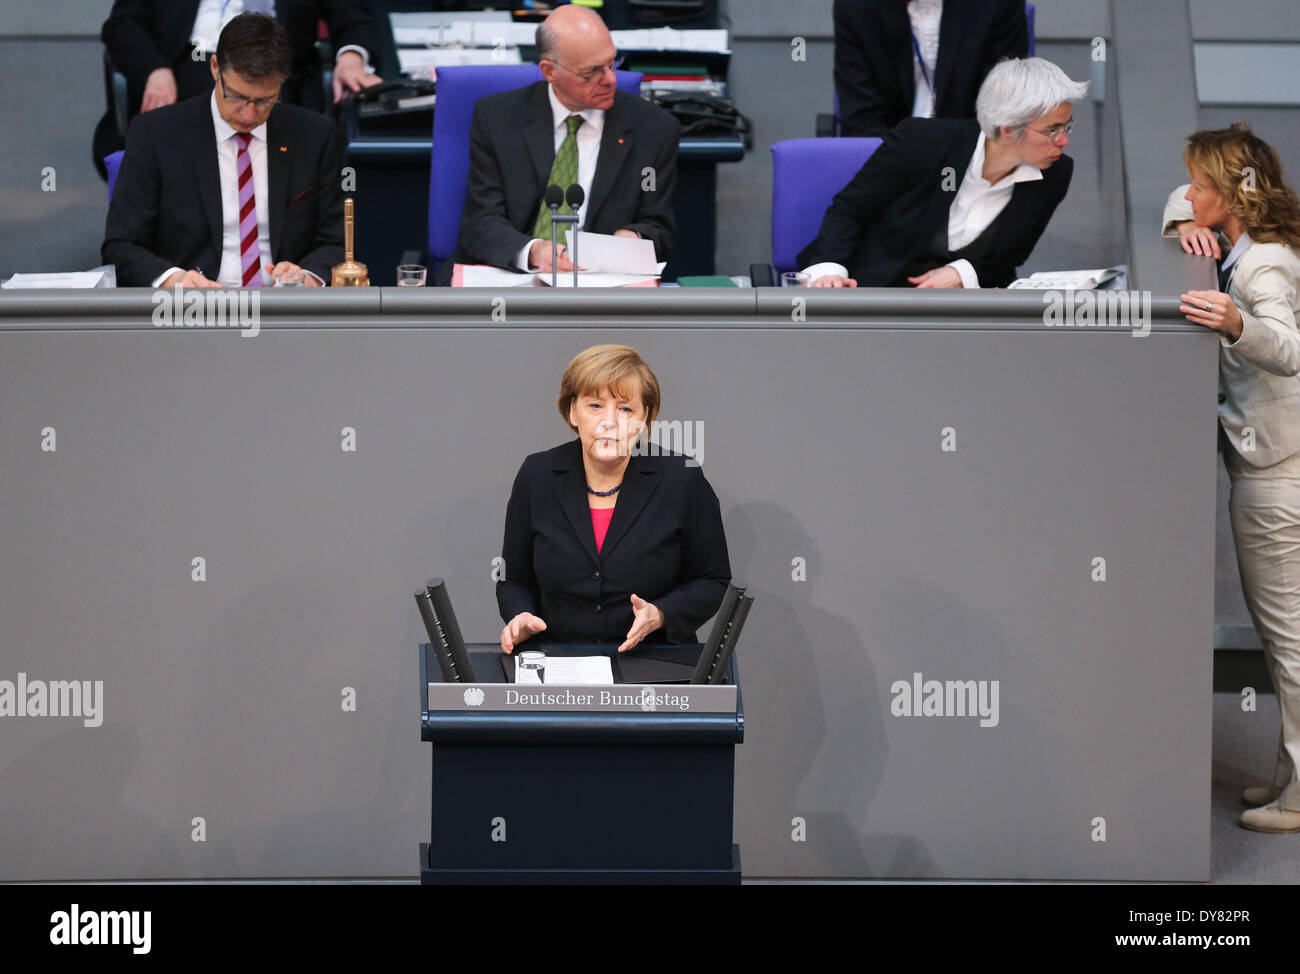 Berlin, Germany. 9th Apr, 2014. German Chancellor Angela Merkel (front) speaks during a debate on the 2014 federal budget at the Bundestag, the lower house of parliament, in Berlin, Germany, on April 9, 2014. Credit:  Zhang Fan/Xinhua/Alamy Live News Stock Photo